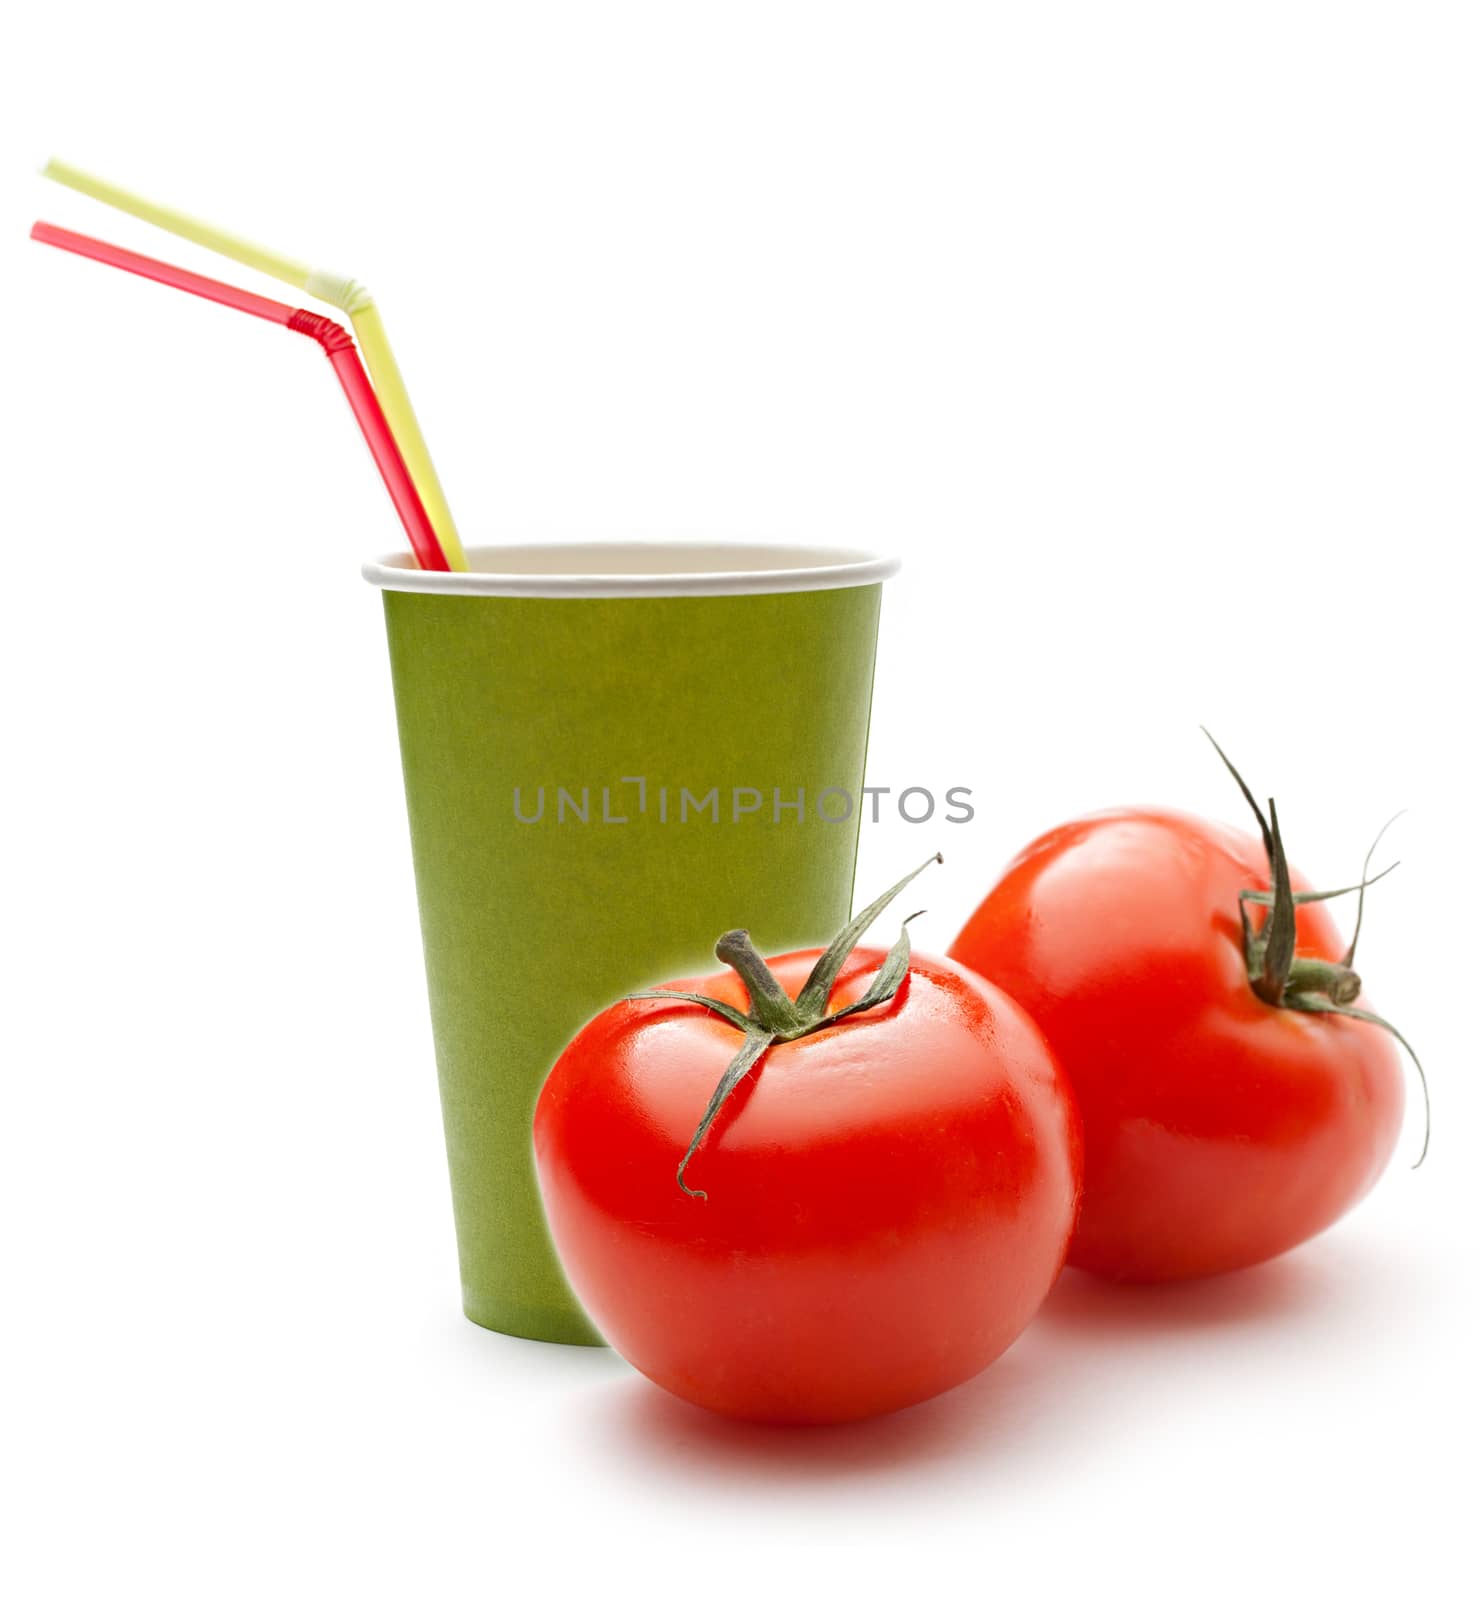 Paper cup with straws and tomatoes by Garsya